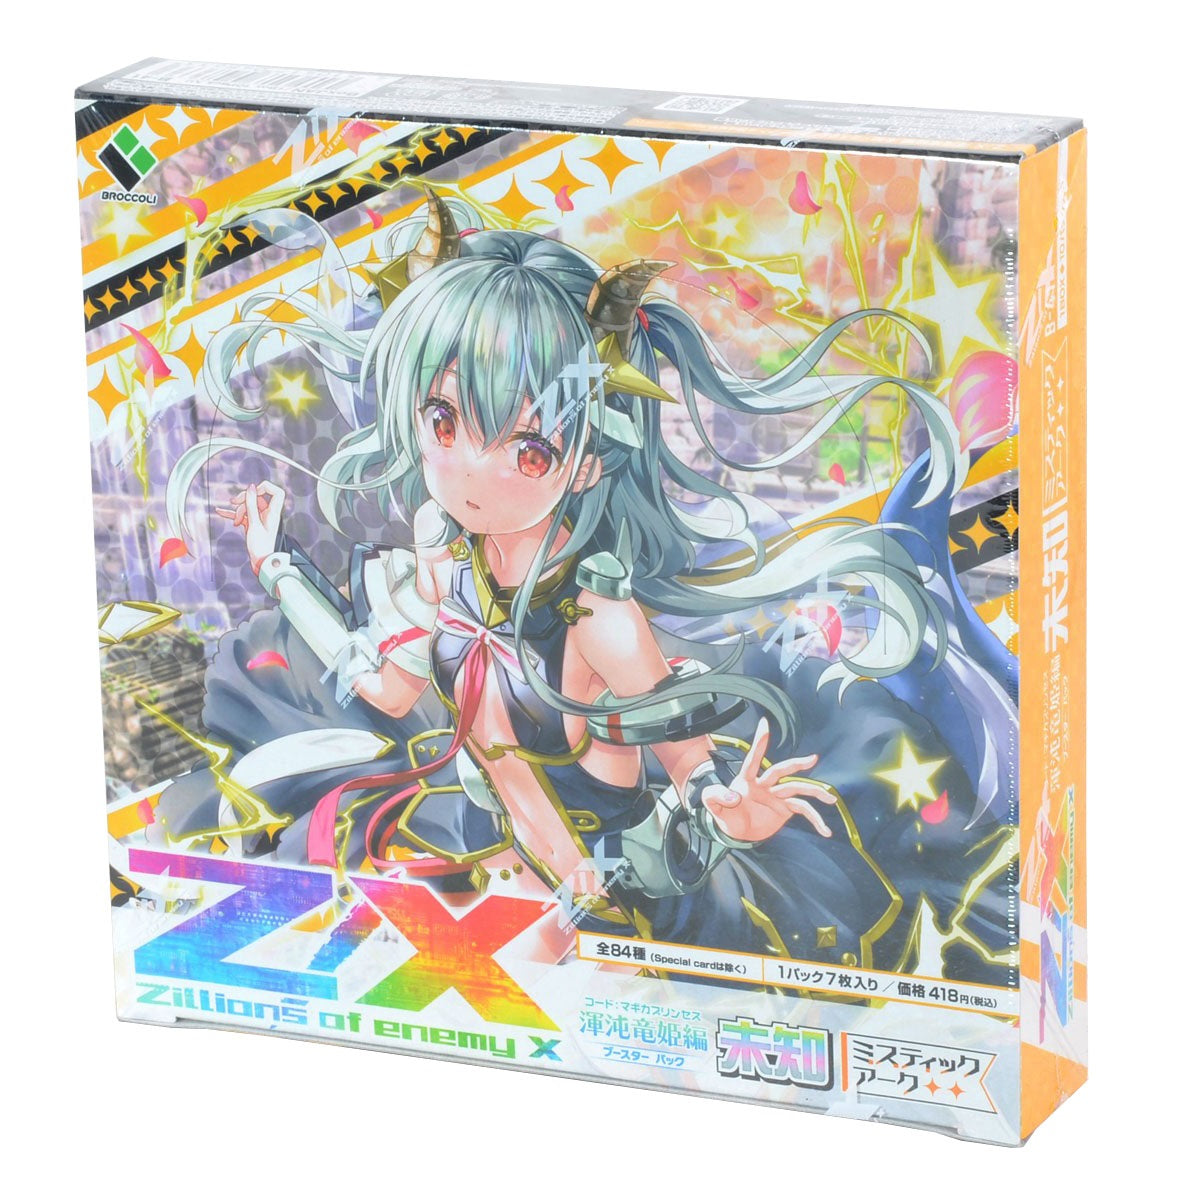 Z/X -Zillions of enemy X- Booster Magica Princess "Michi" Mystic Arc [ZX-B-41] (Japanese)-Booster Pack (Random)-Broccoli-Ace Cards & Collectibles